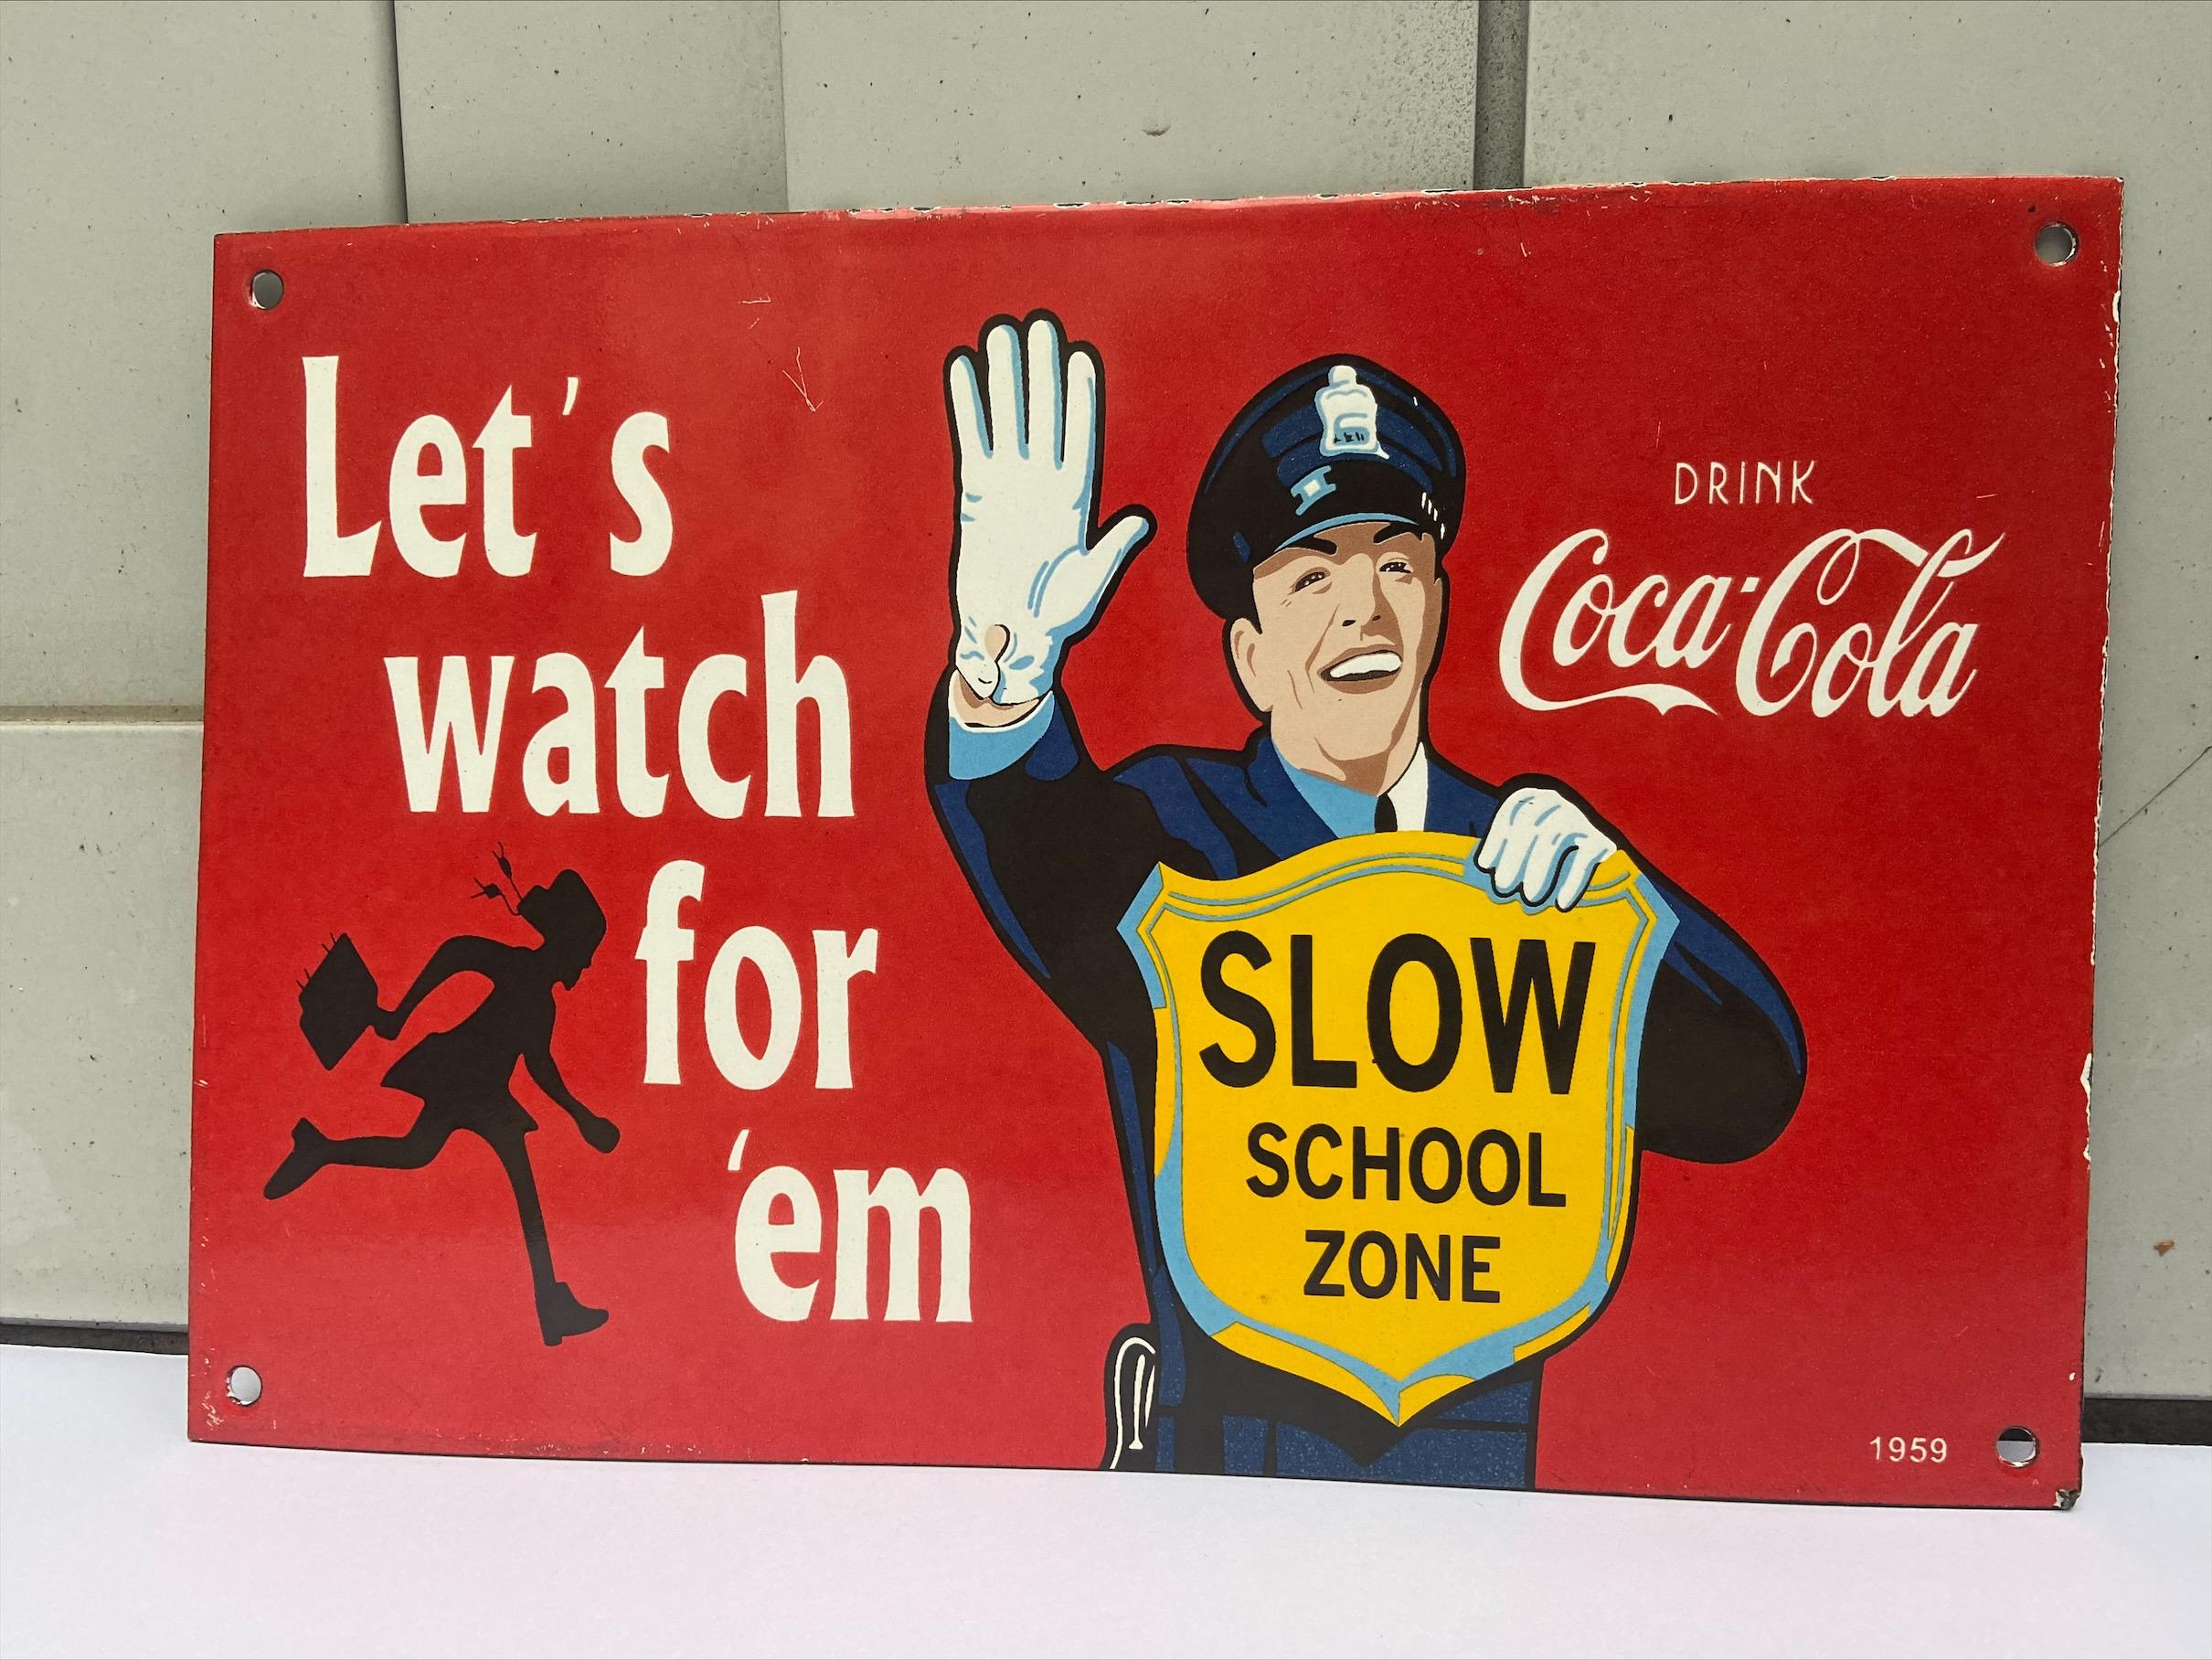 'Slow school zone' sign - Coca-Cola x traffic cop
original
1959

Enamelled metal plate
4 small holes to attach the sign
Measures: 30.5 x 20 cm.

